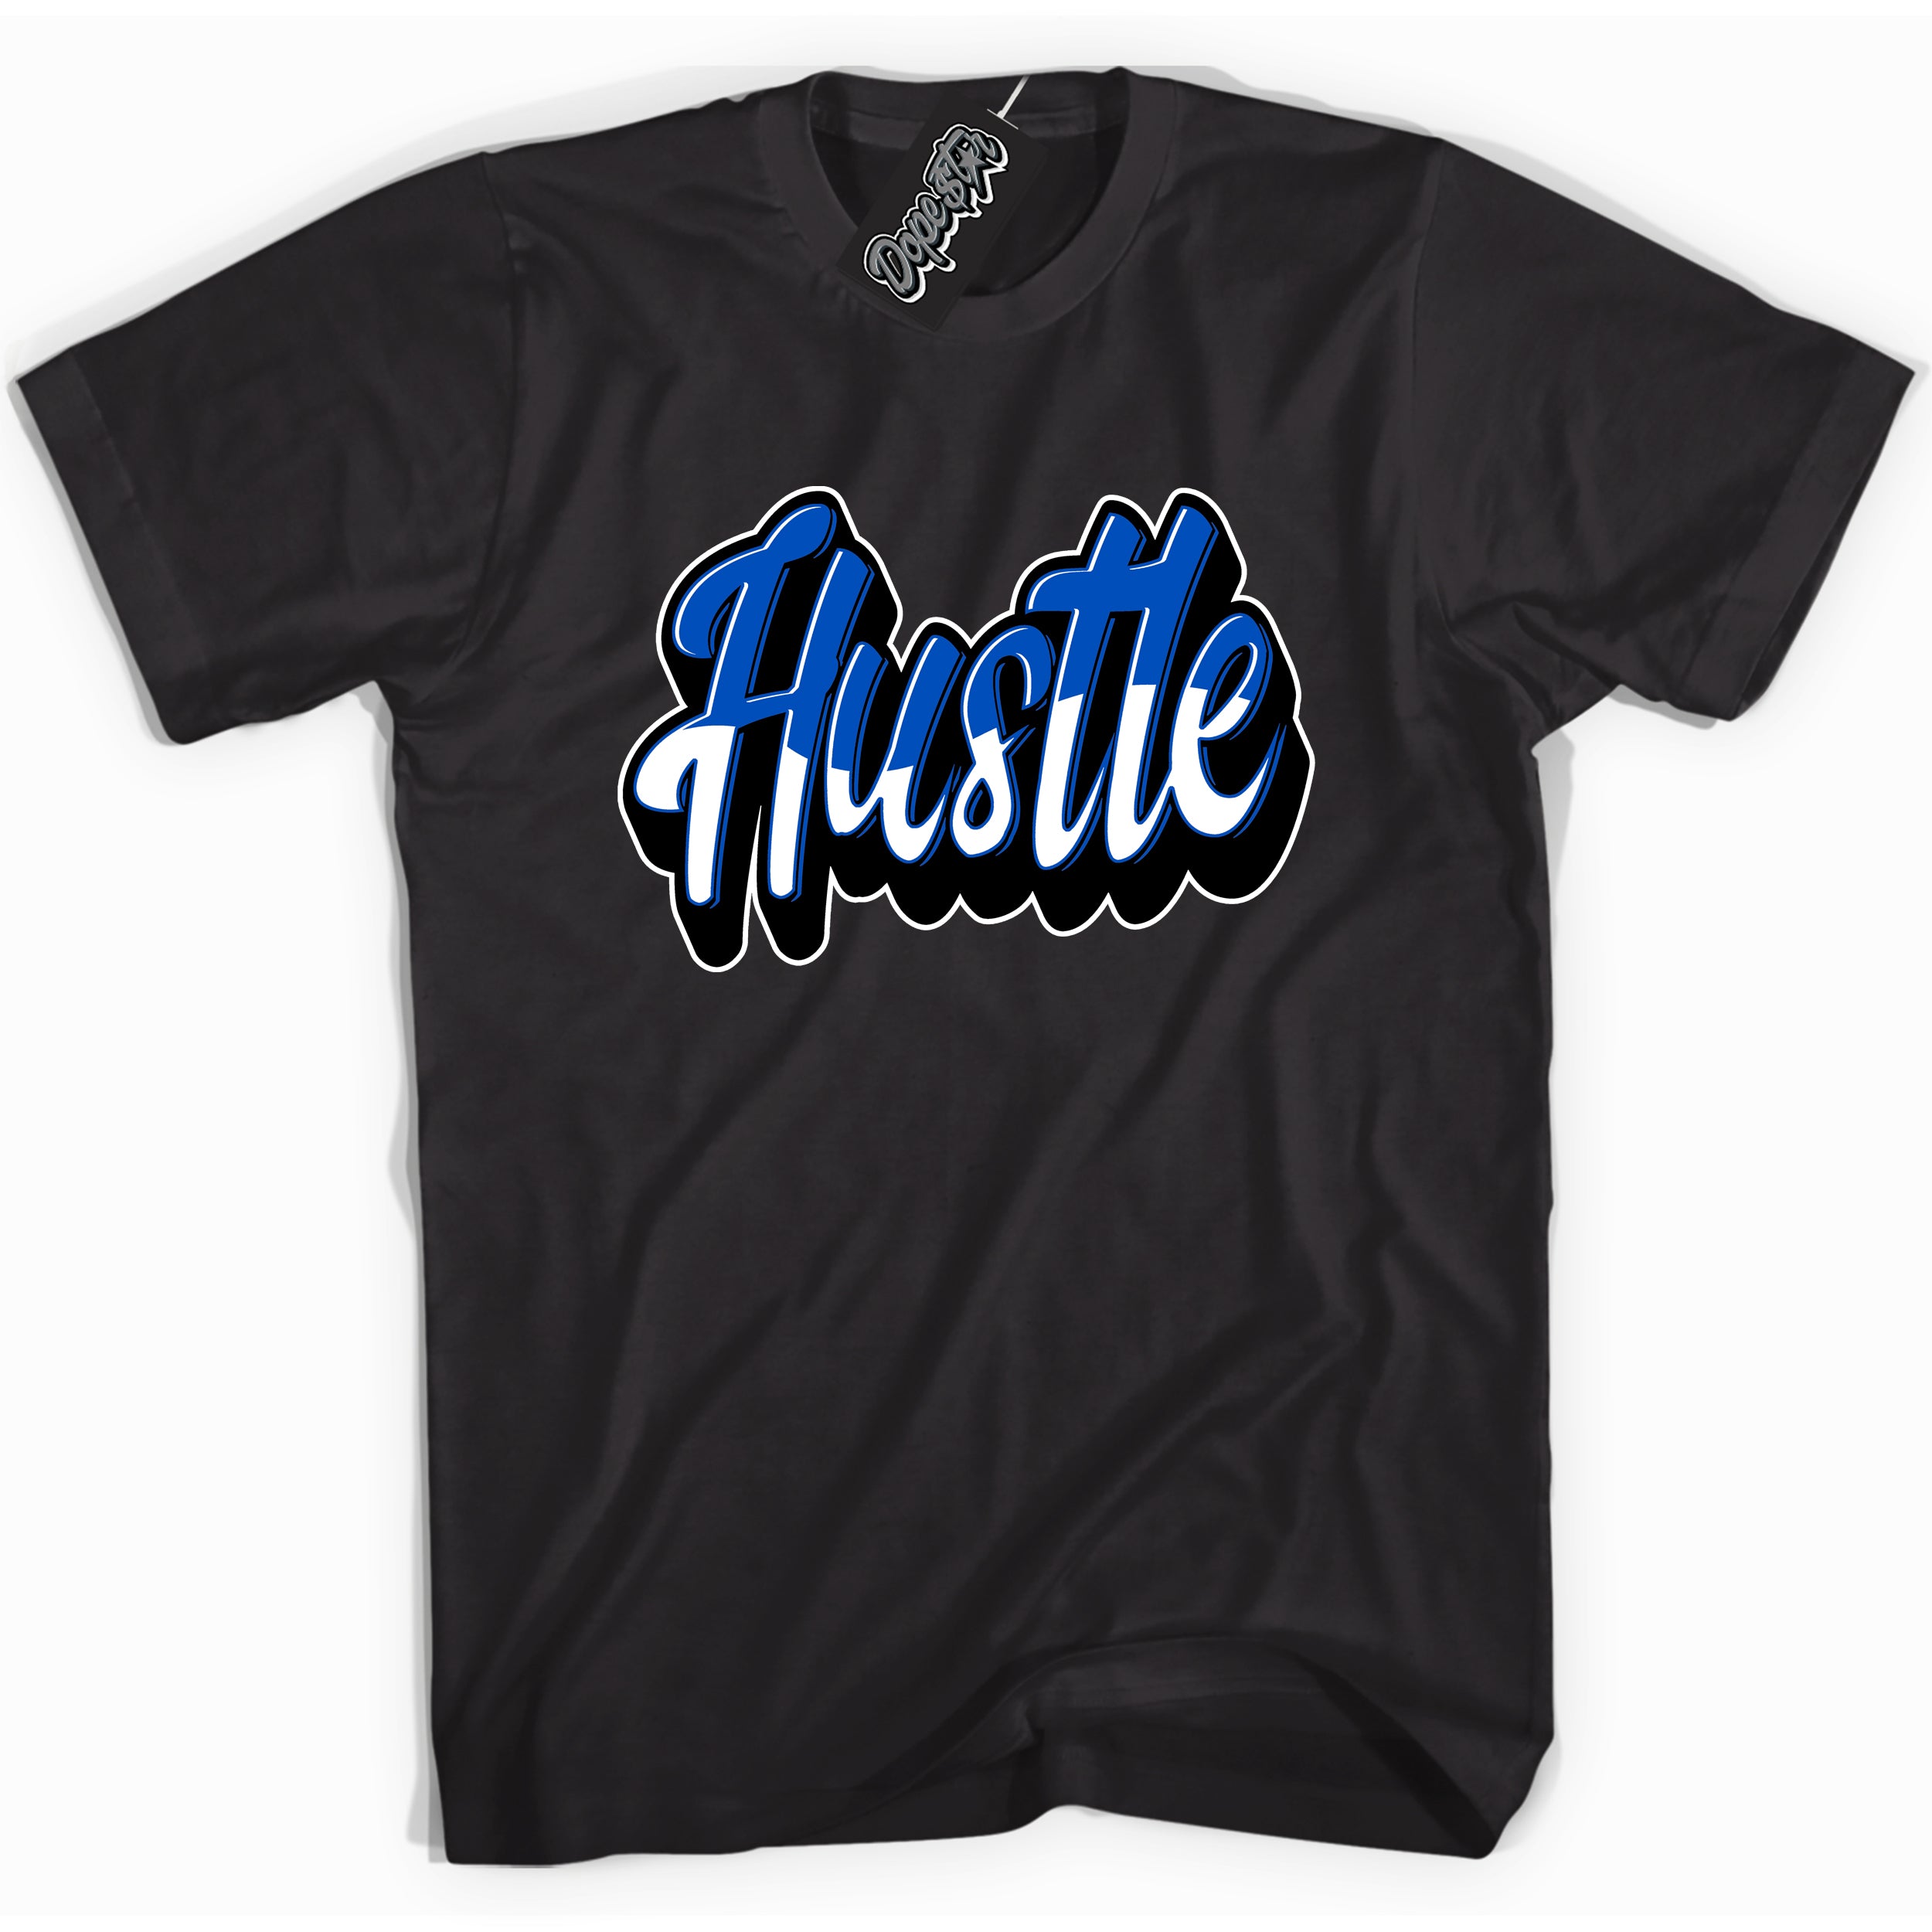 Cool Black graphic tee with "Hustle 2" design, that perfectly matches Royal Reimagined 1s sneakers 